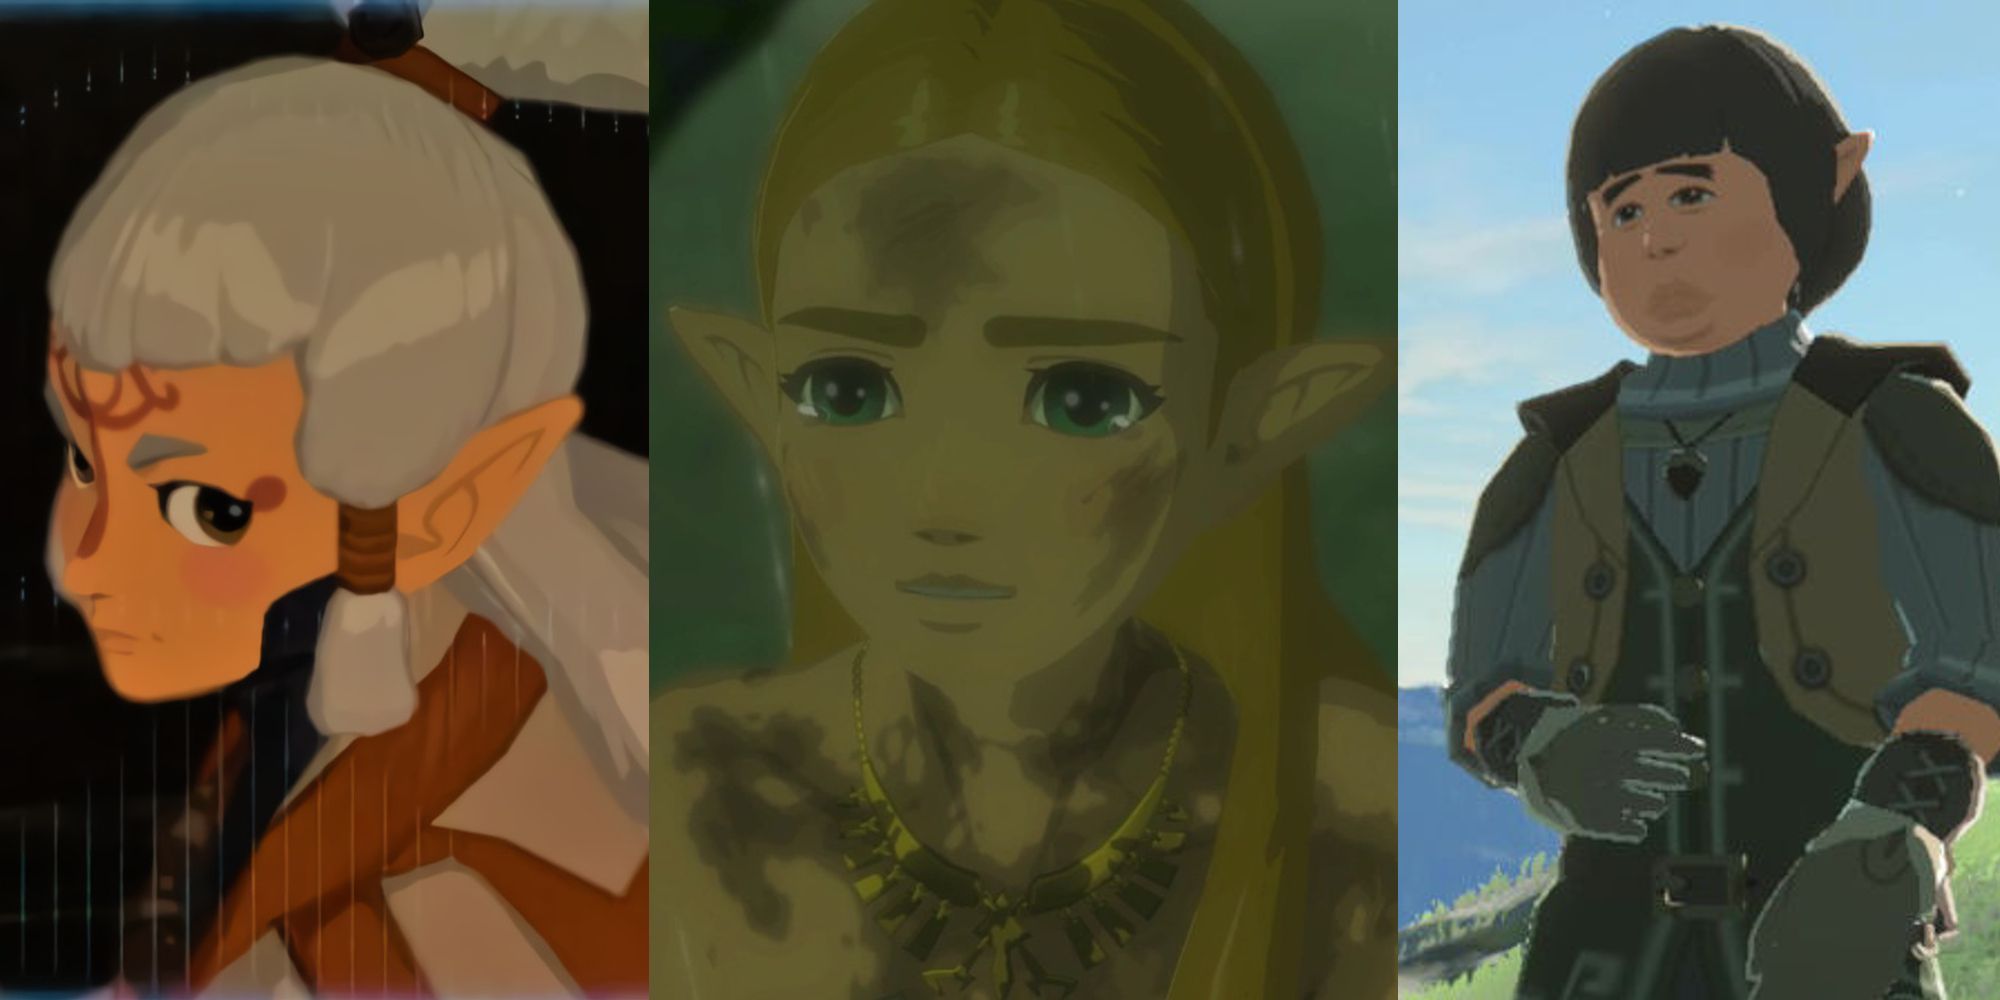 Paya looking at Link through the Sheikah Slate camera; Zelda crying in the rain in a Captured Memory; Mimos standing on the peak of Ebon Mountain